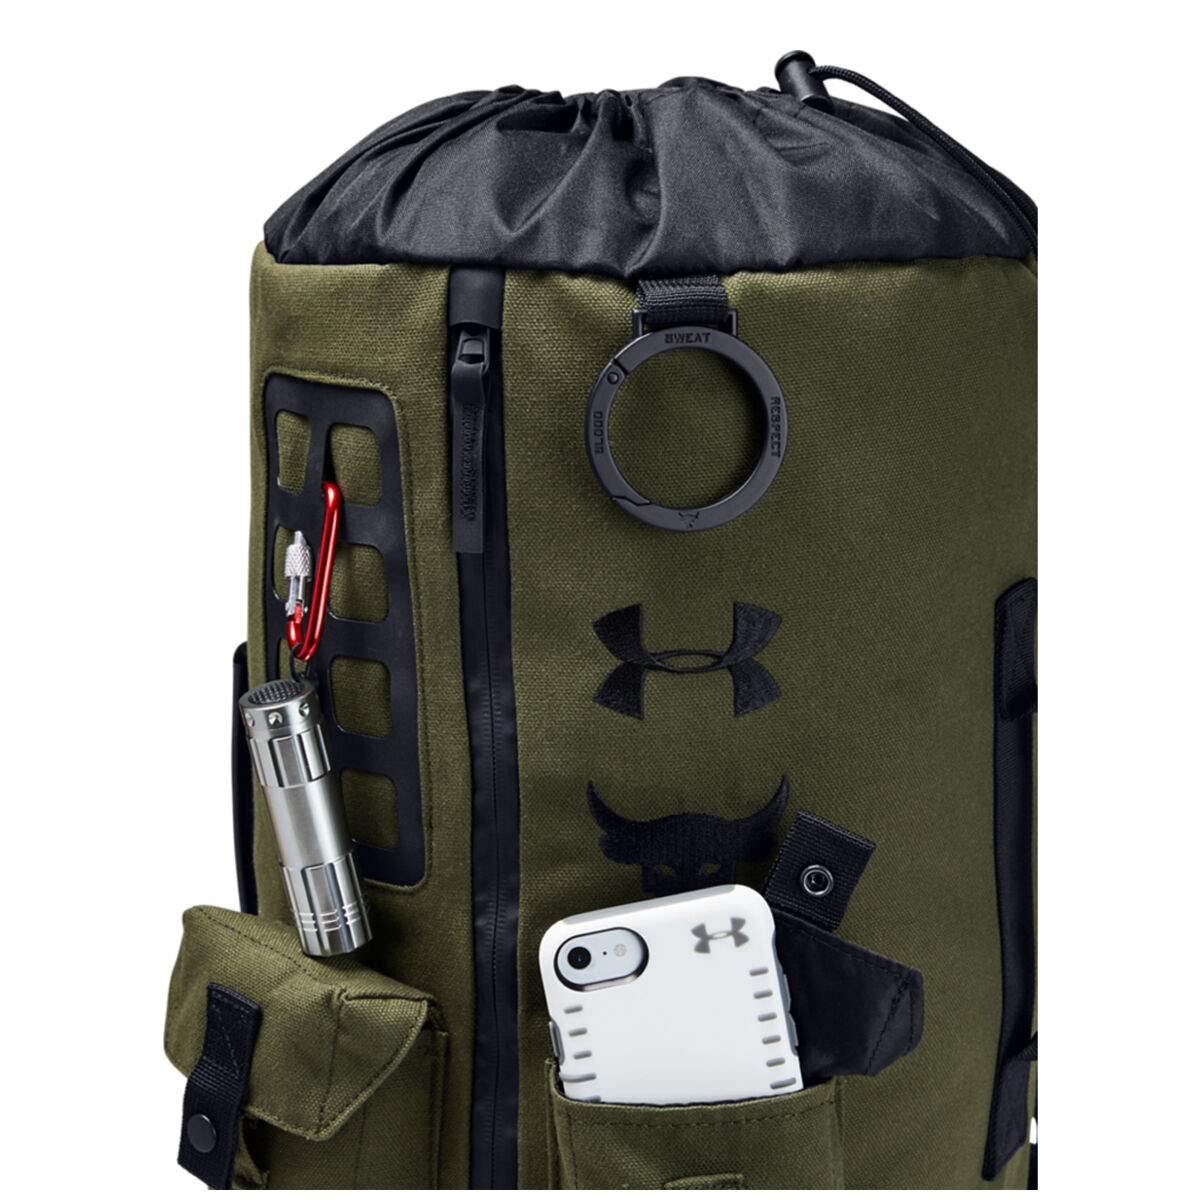 project rock duffle bag review